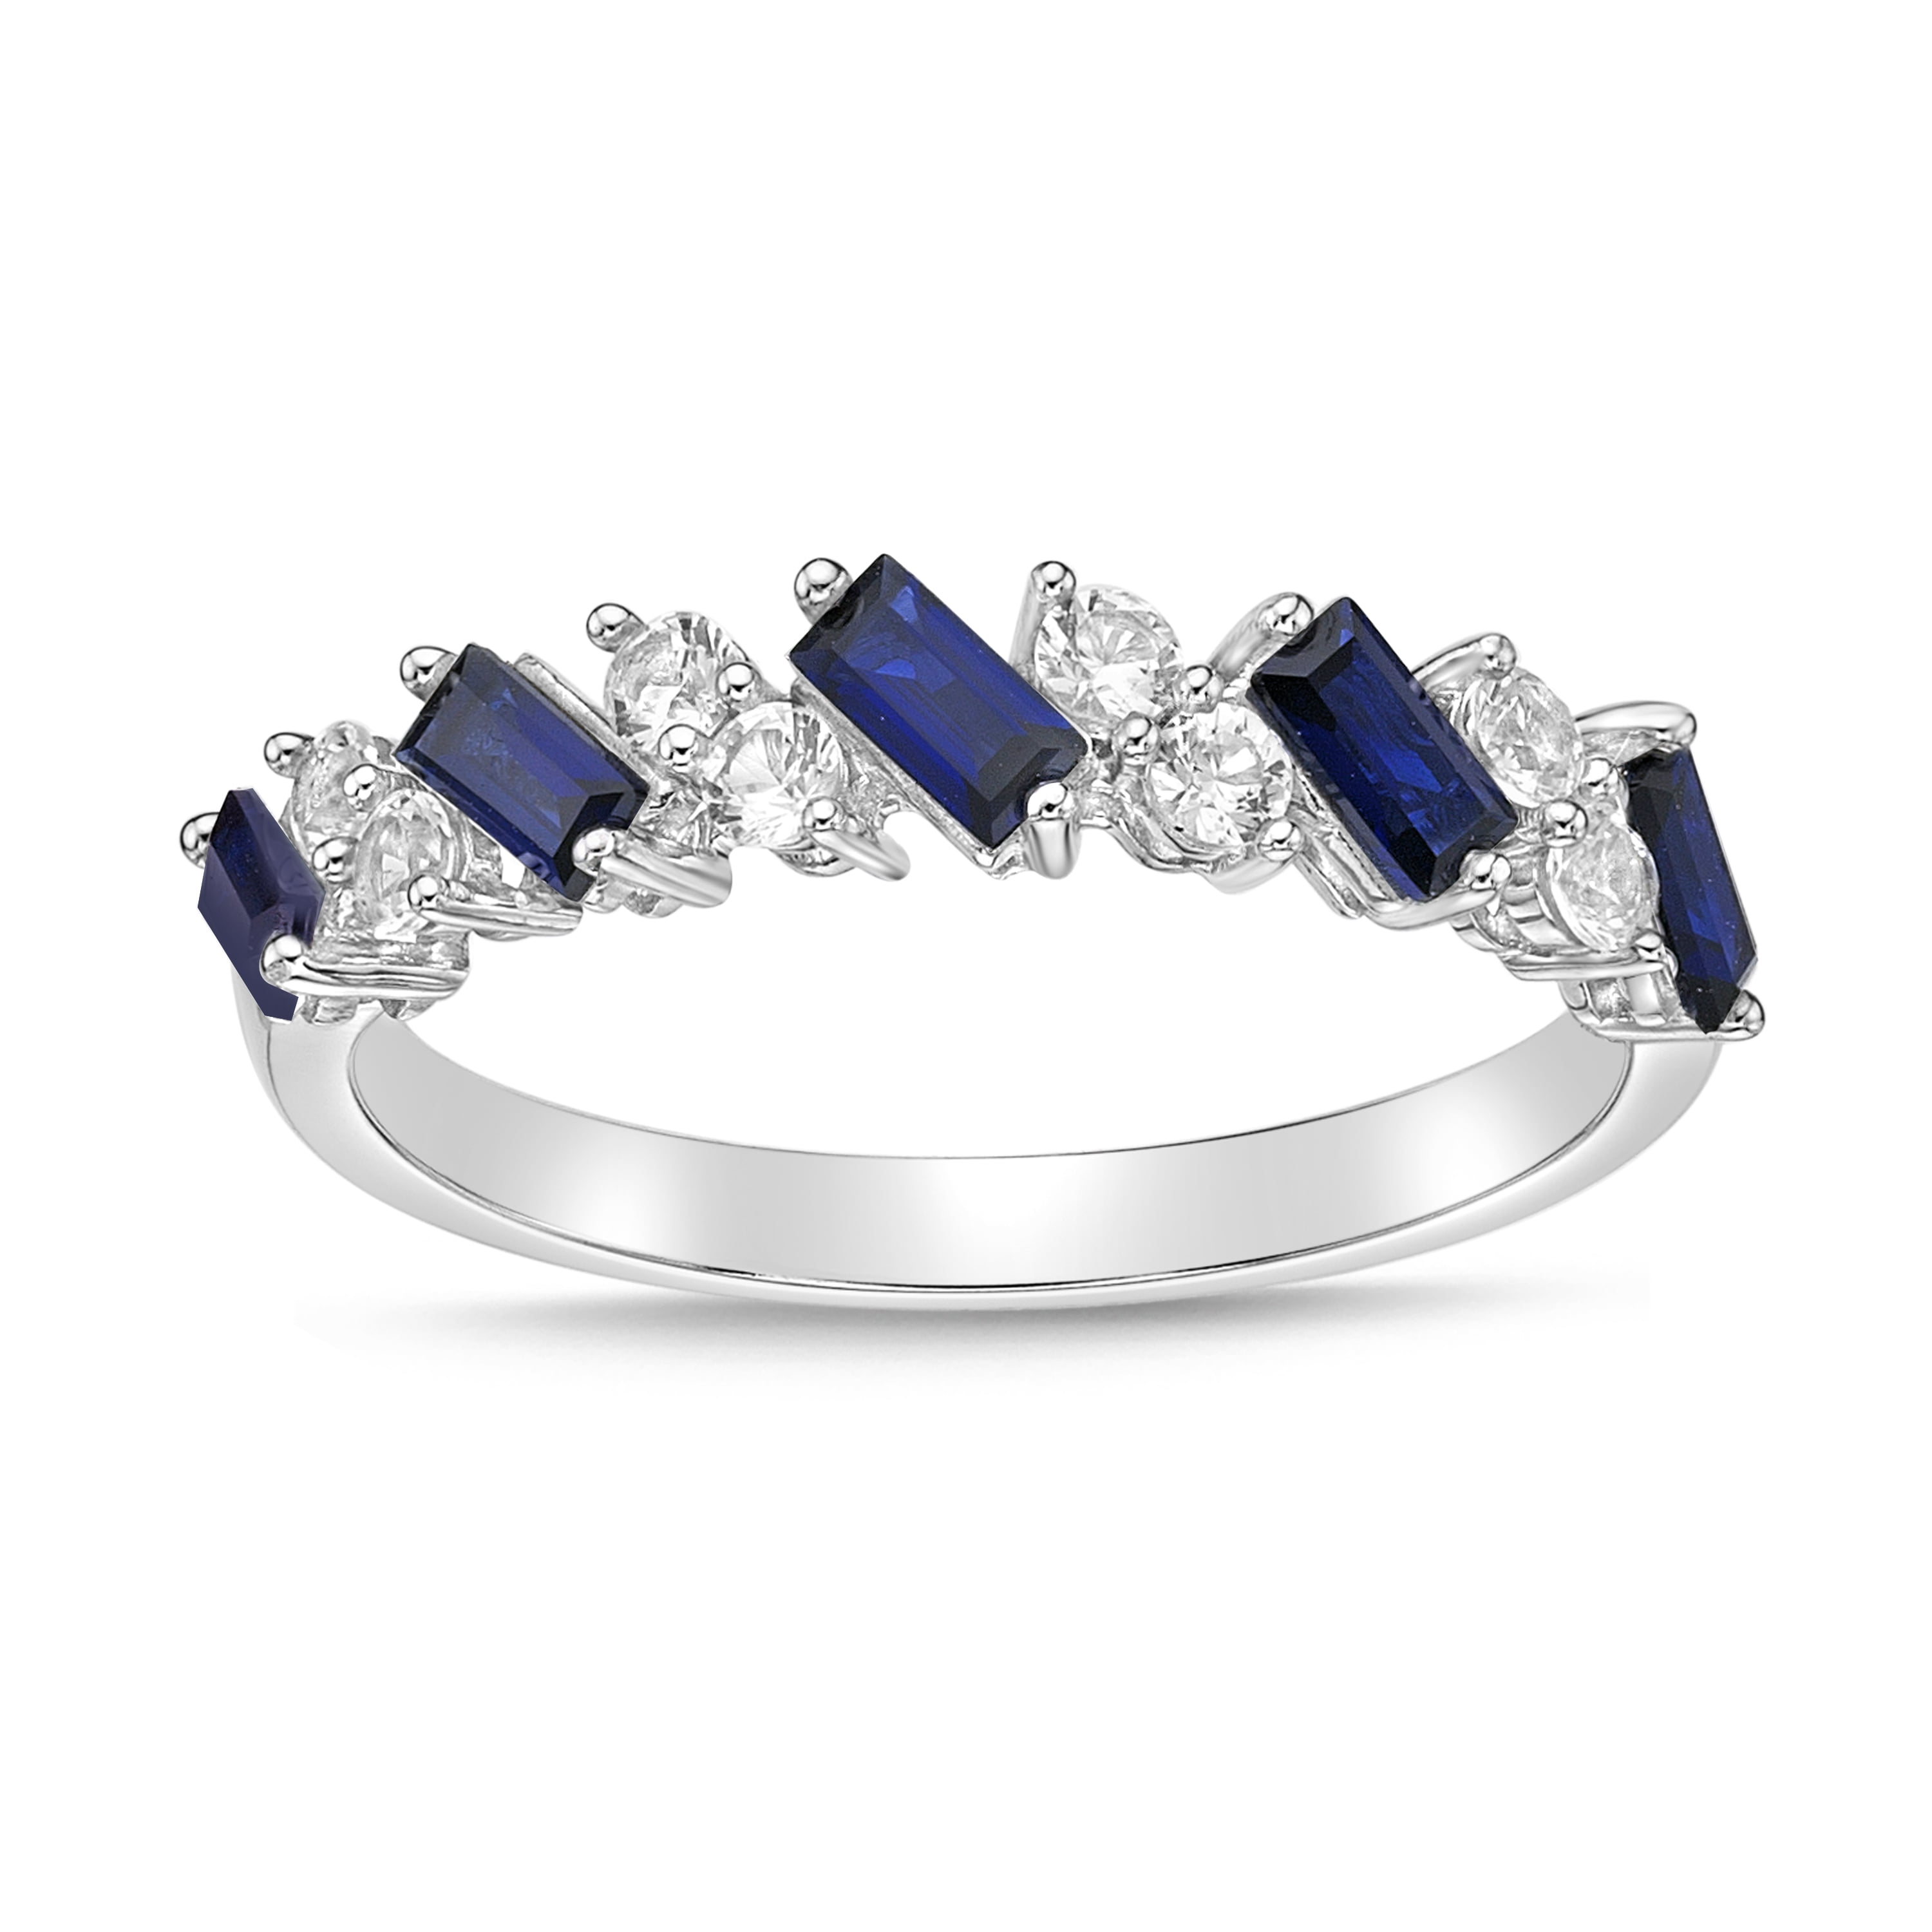 Jewellery Rings Bands Size US 5-8 Silver or Gold Delicate Sapphire Ring Sapphire Blue CZ Ring in Sterling Silver 